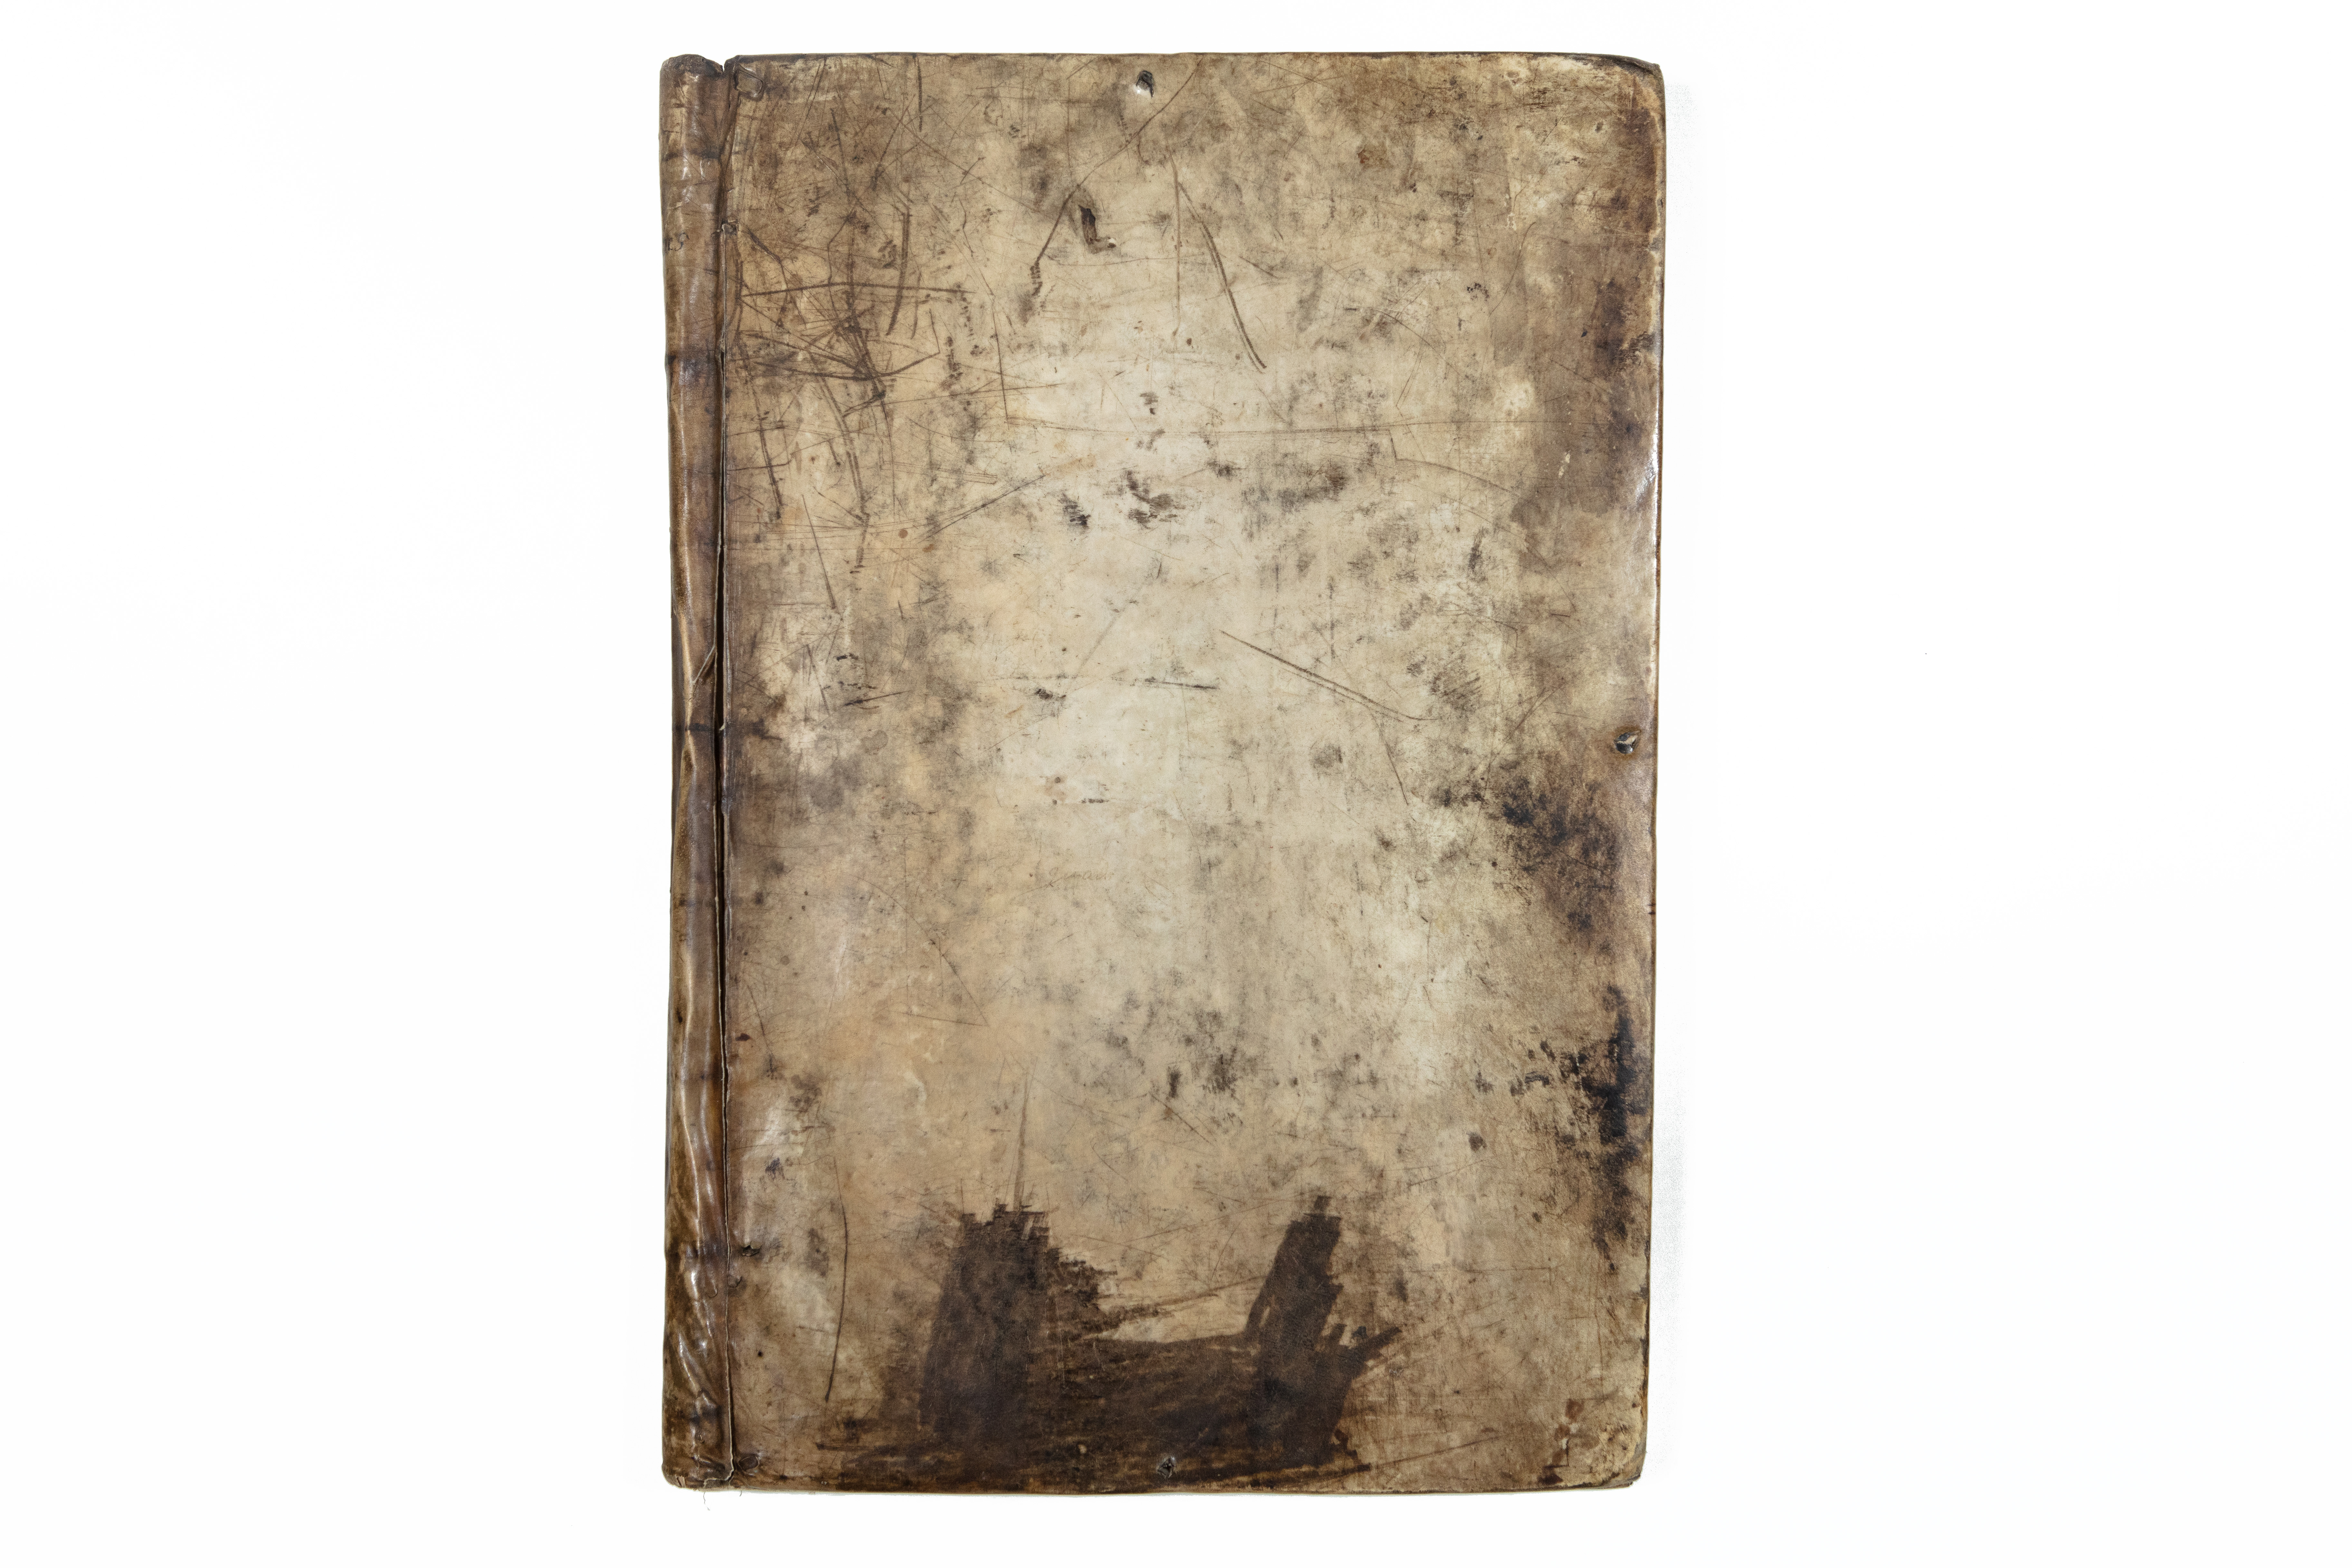 Visible reflectance photograph of the front cover of the original parchment binding